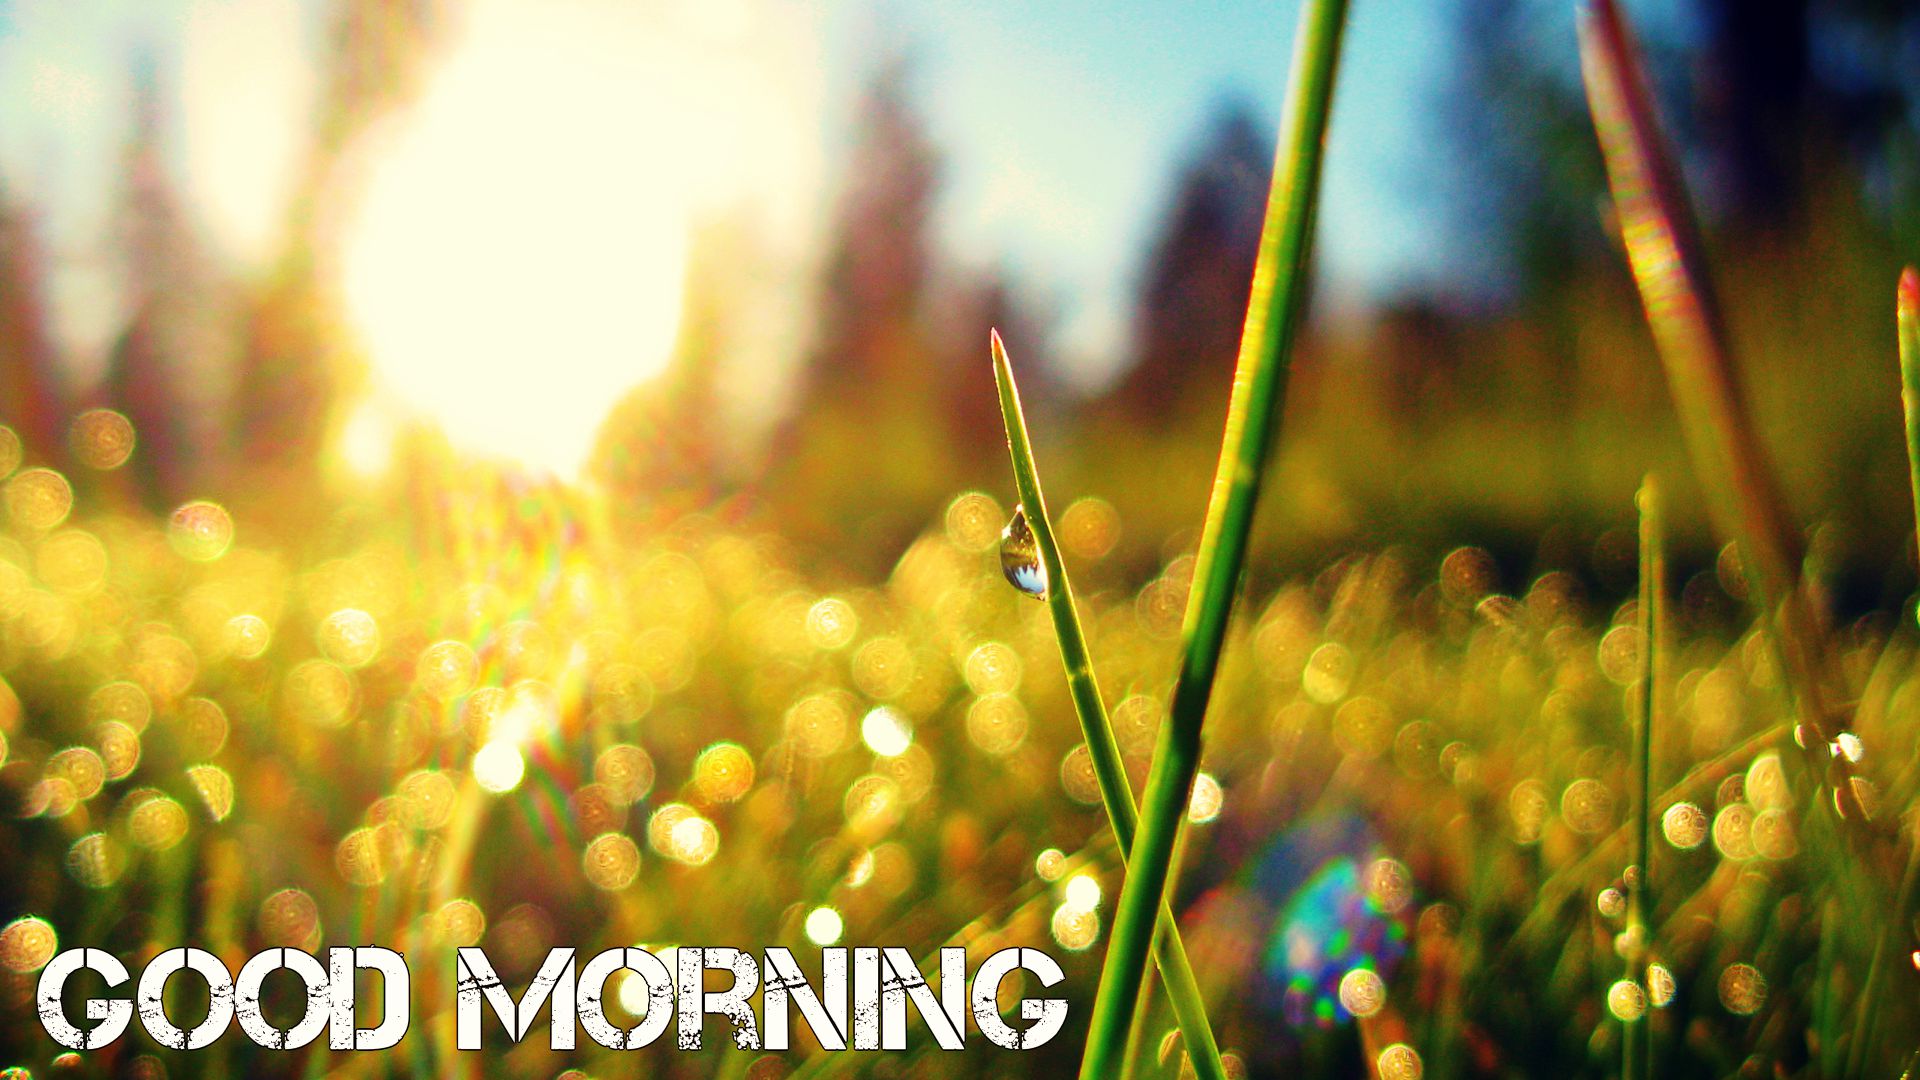 good morning hd wallpaper,people in nature,nature,grass,green,sunlight